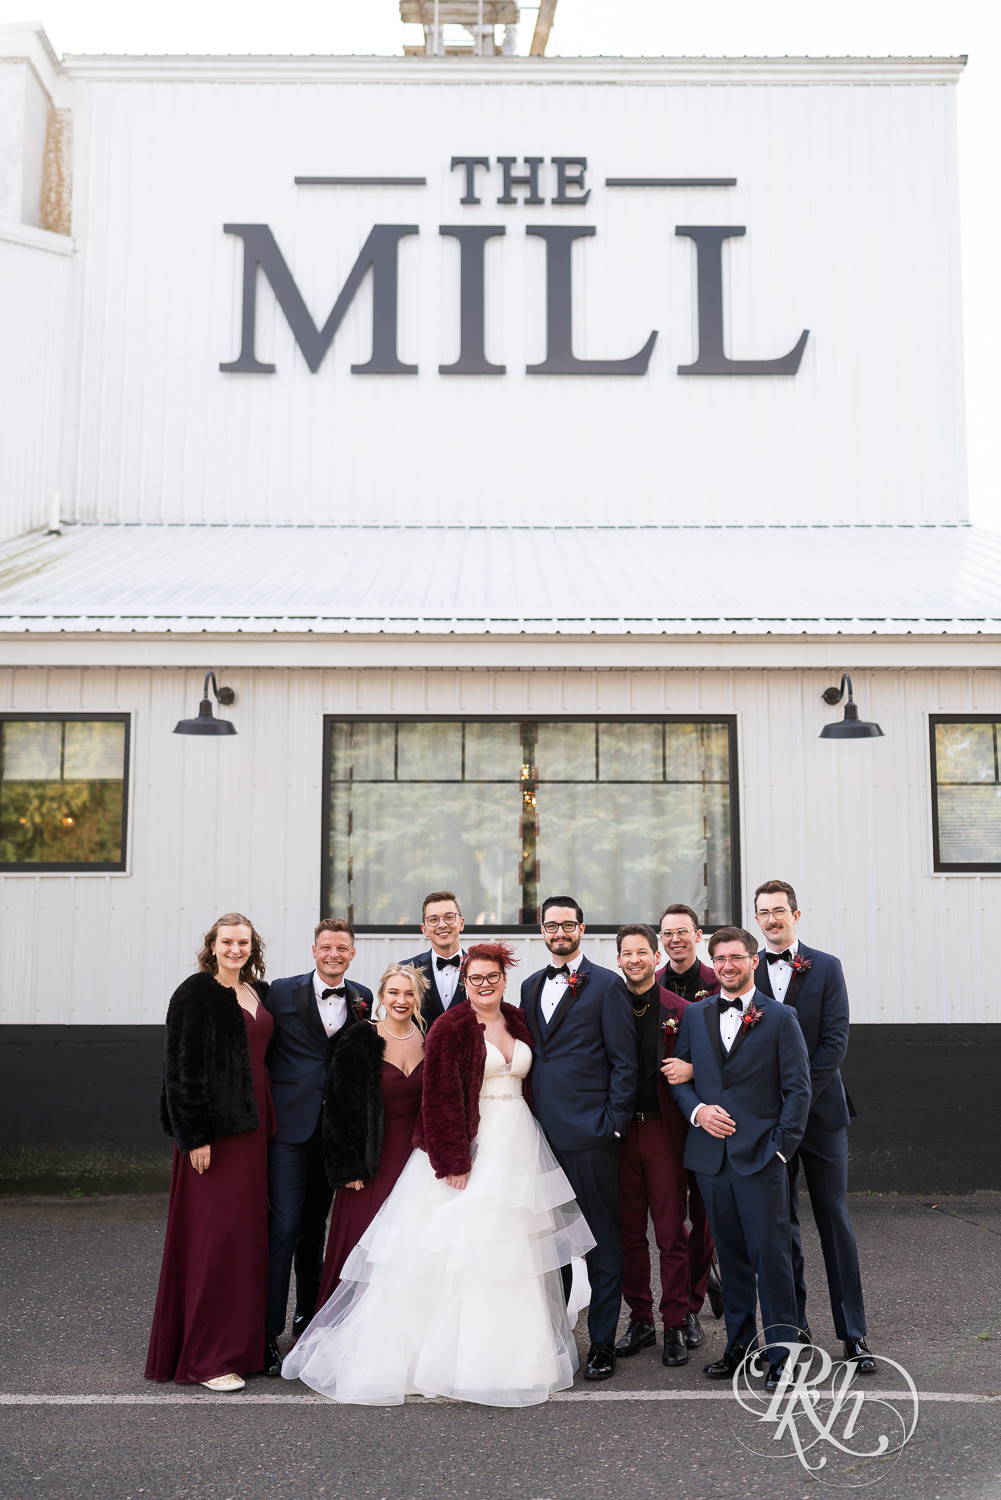 Wedding party at The Mill Events in Chetek, Wisconsin. 